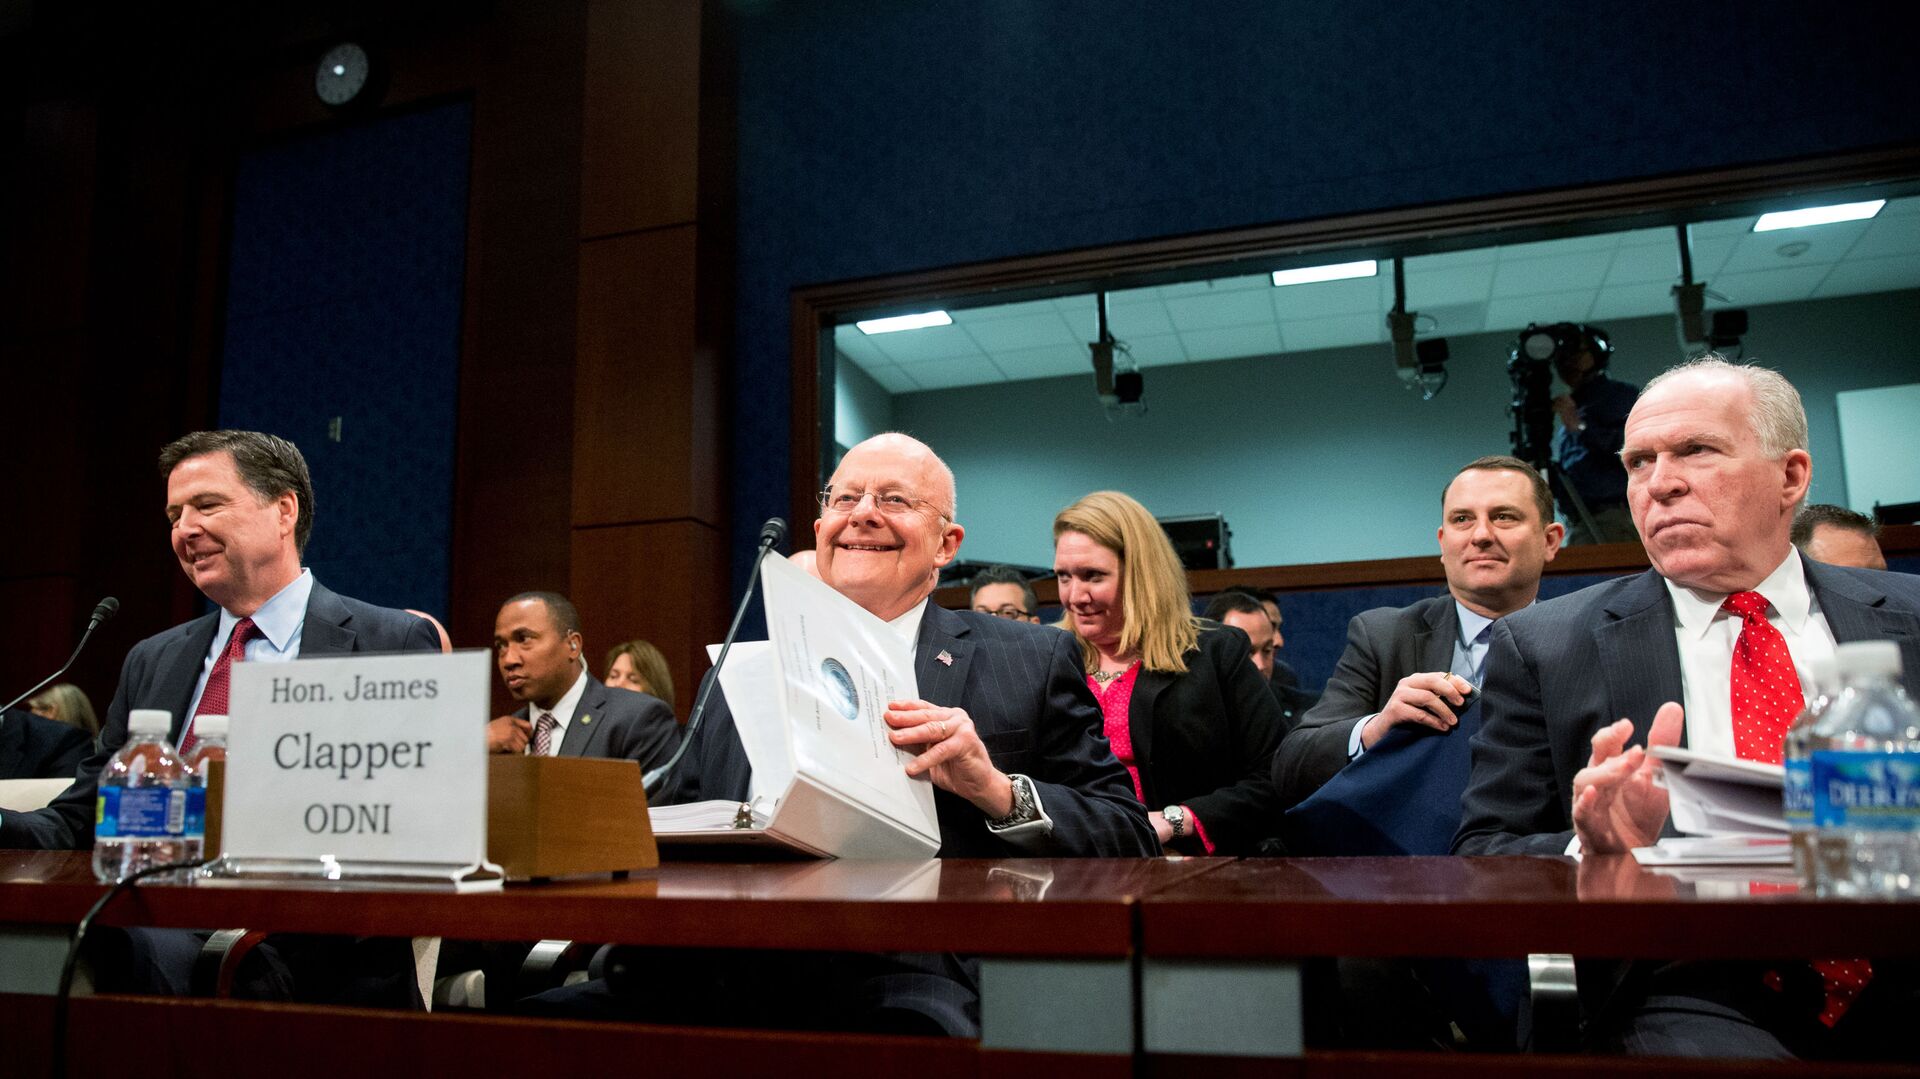 From left, then-FBI Director James Comey, then-Director of National Intelligence James Clapper, and then-CIA Director John Brennan arrive at a House Intelligence Committee hearing on world wide threats on Capitol Hill in Washington, Thursday, Feb. 25, 2016. - Sputnik International, 1920, 26.05.2022